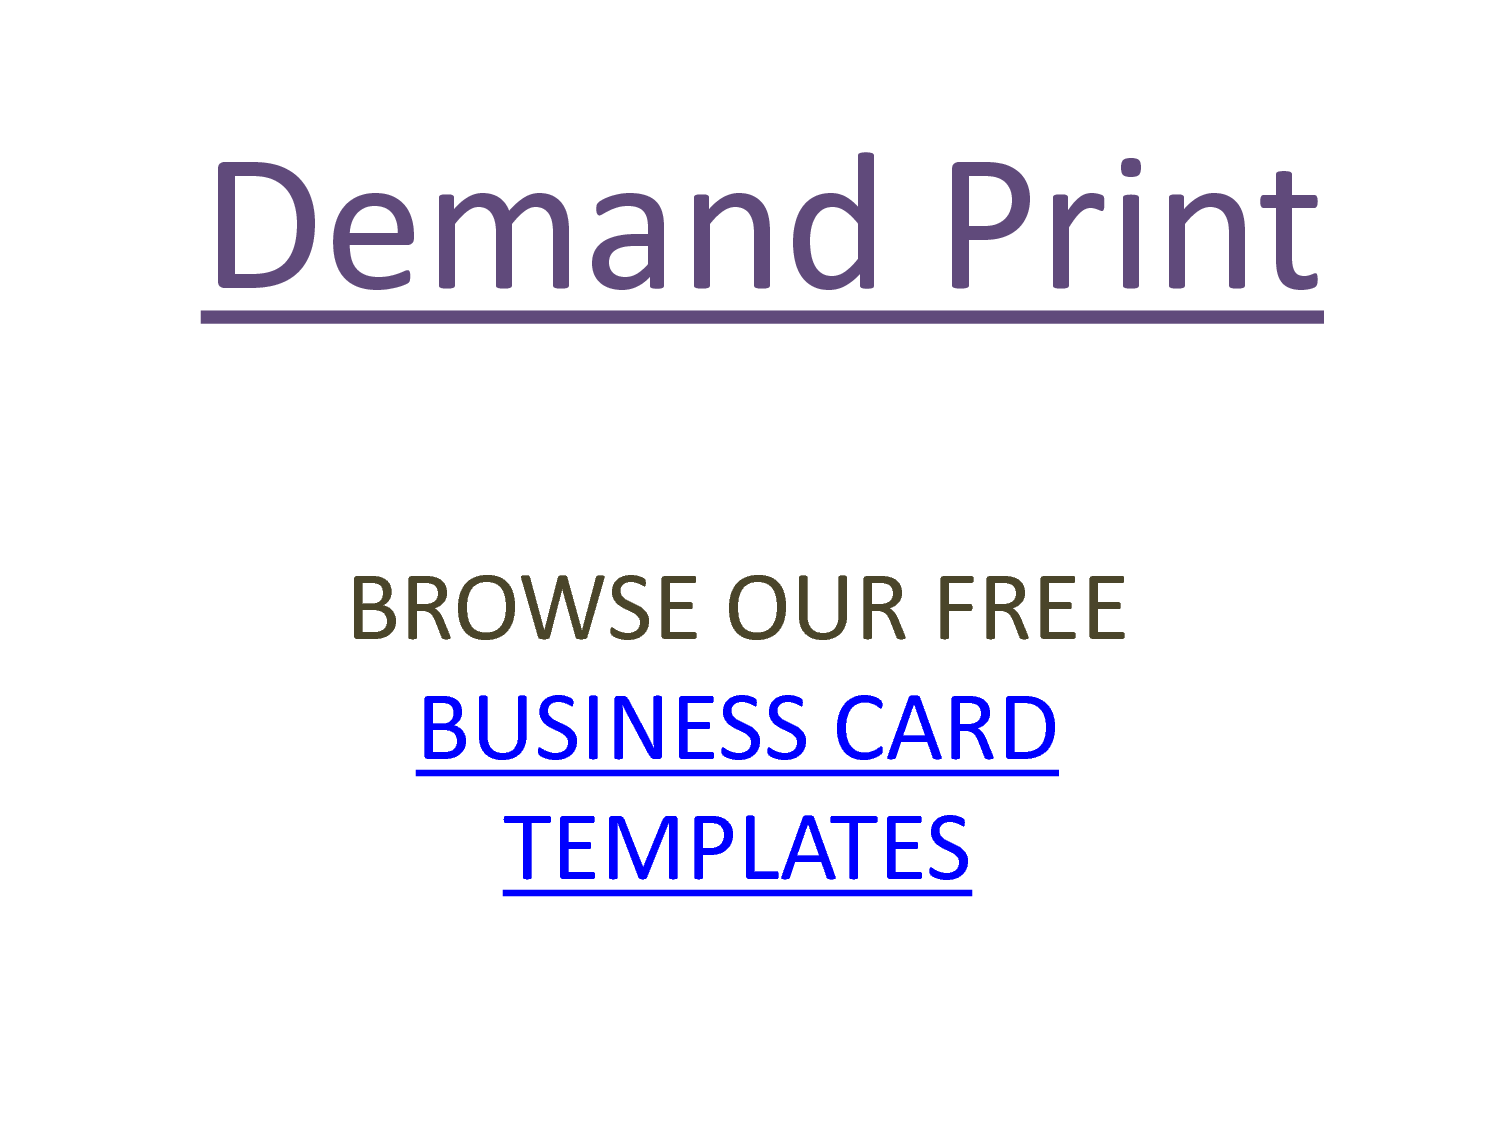 20 Free PowerPoint Designs Business Card Images - PowerPoint Free Intended For Christian Business Cards Templates Free